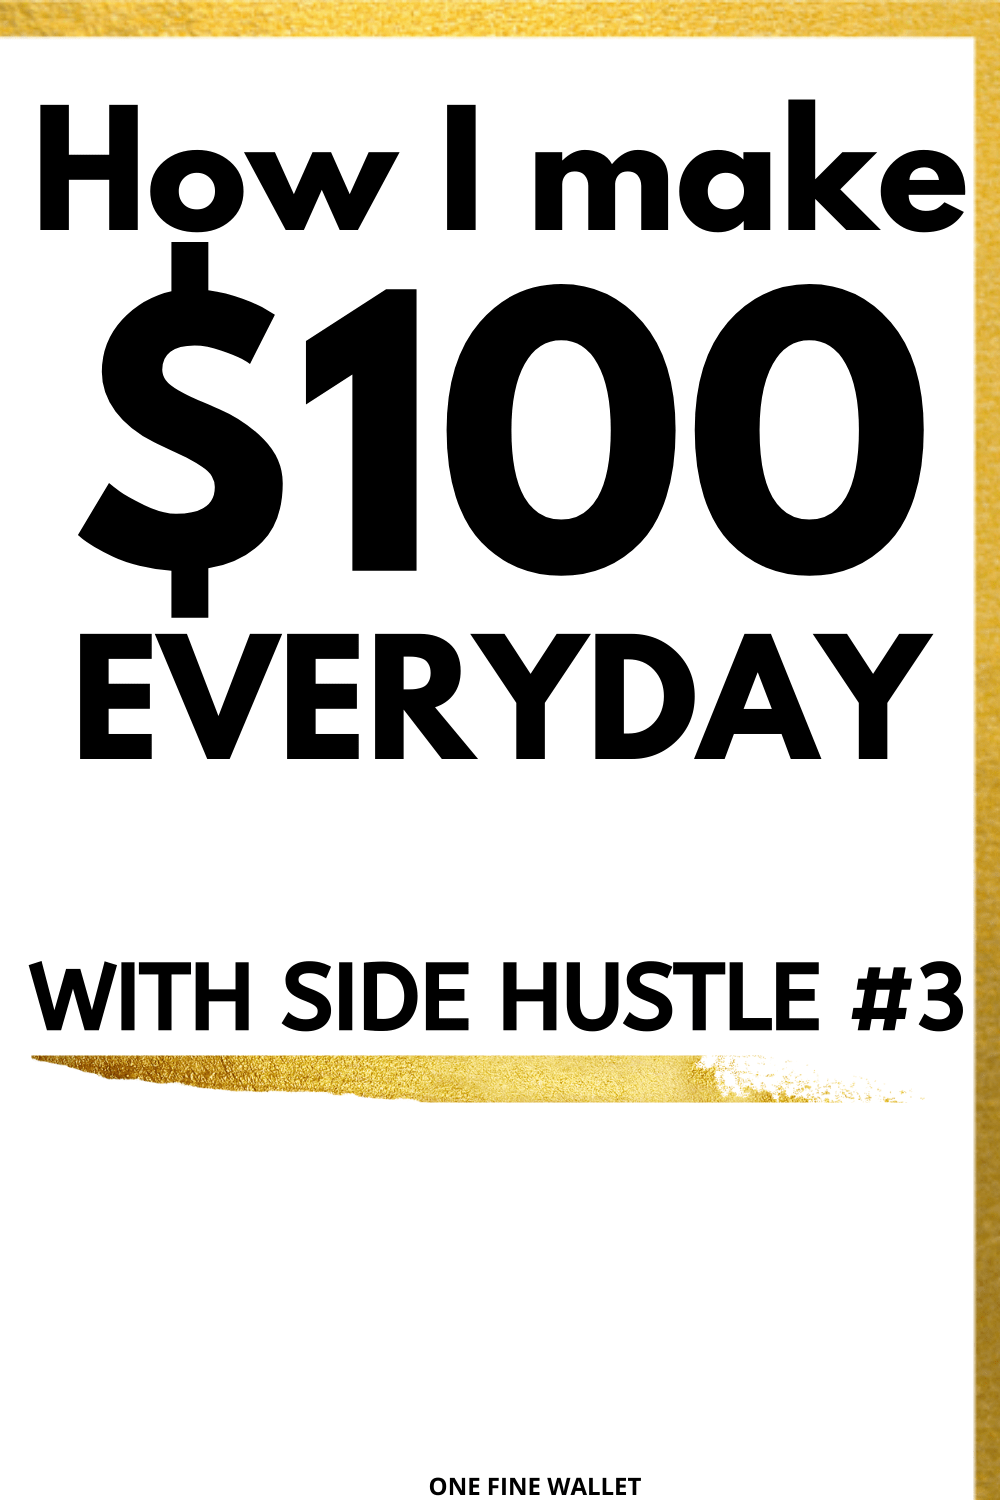 Make money online with these side hustles to earn an extra $100 a day. Ready to make money from home?